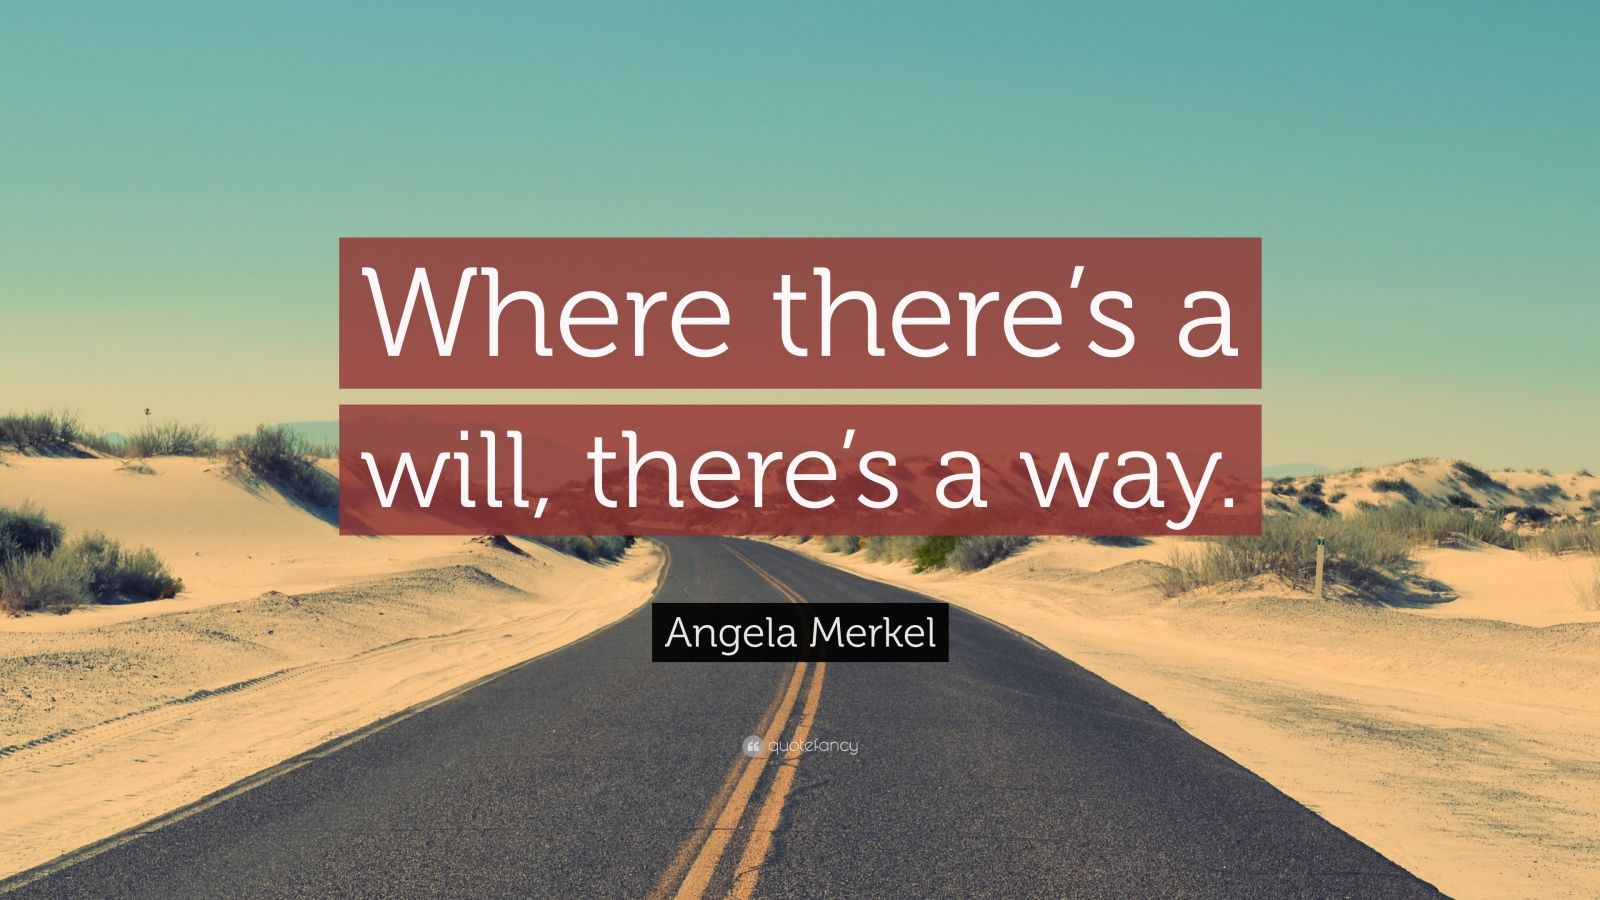 Angela Merkel Quote: "Where there's a will, there's a way ...